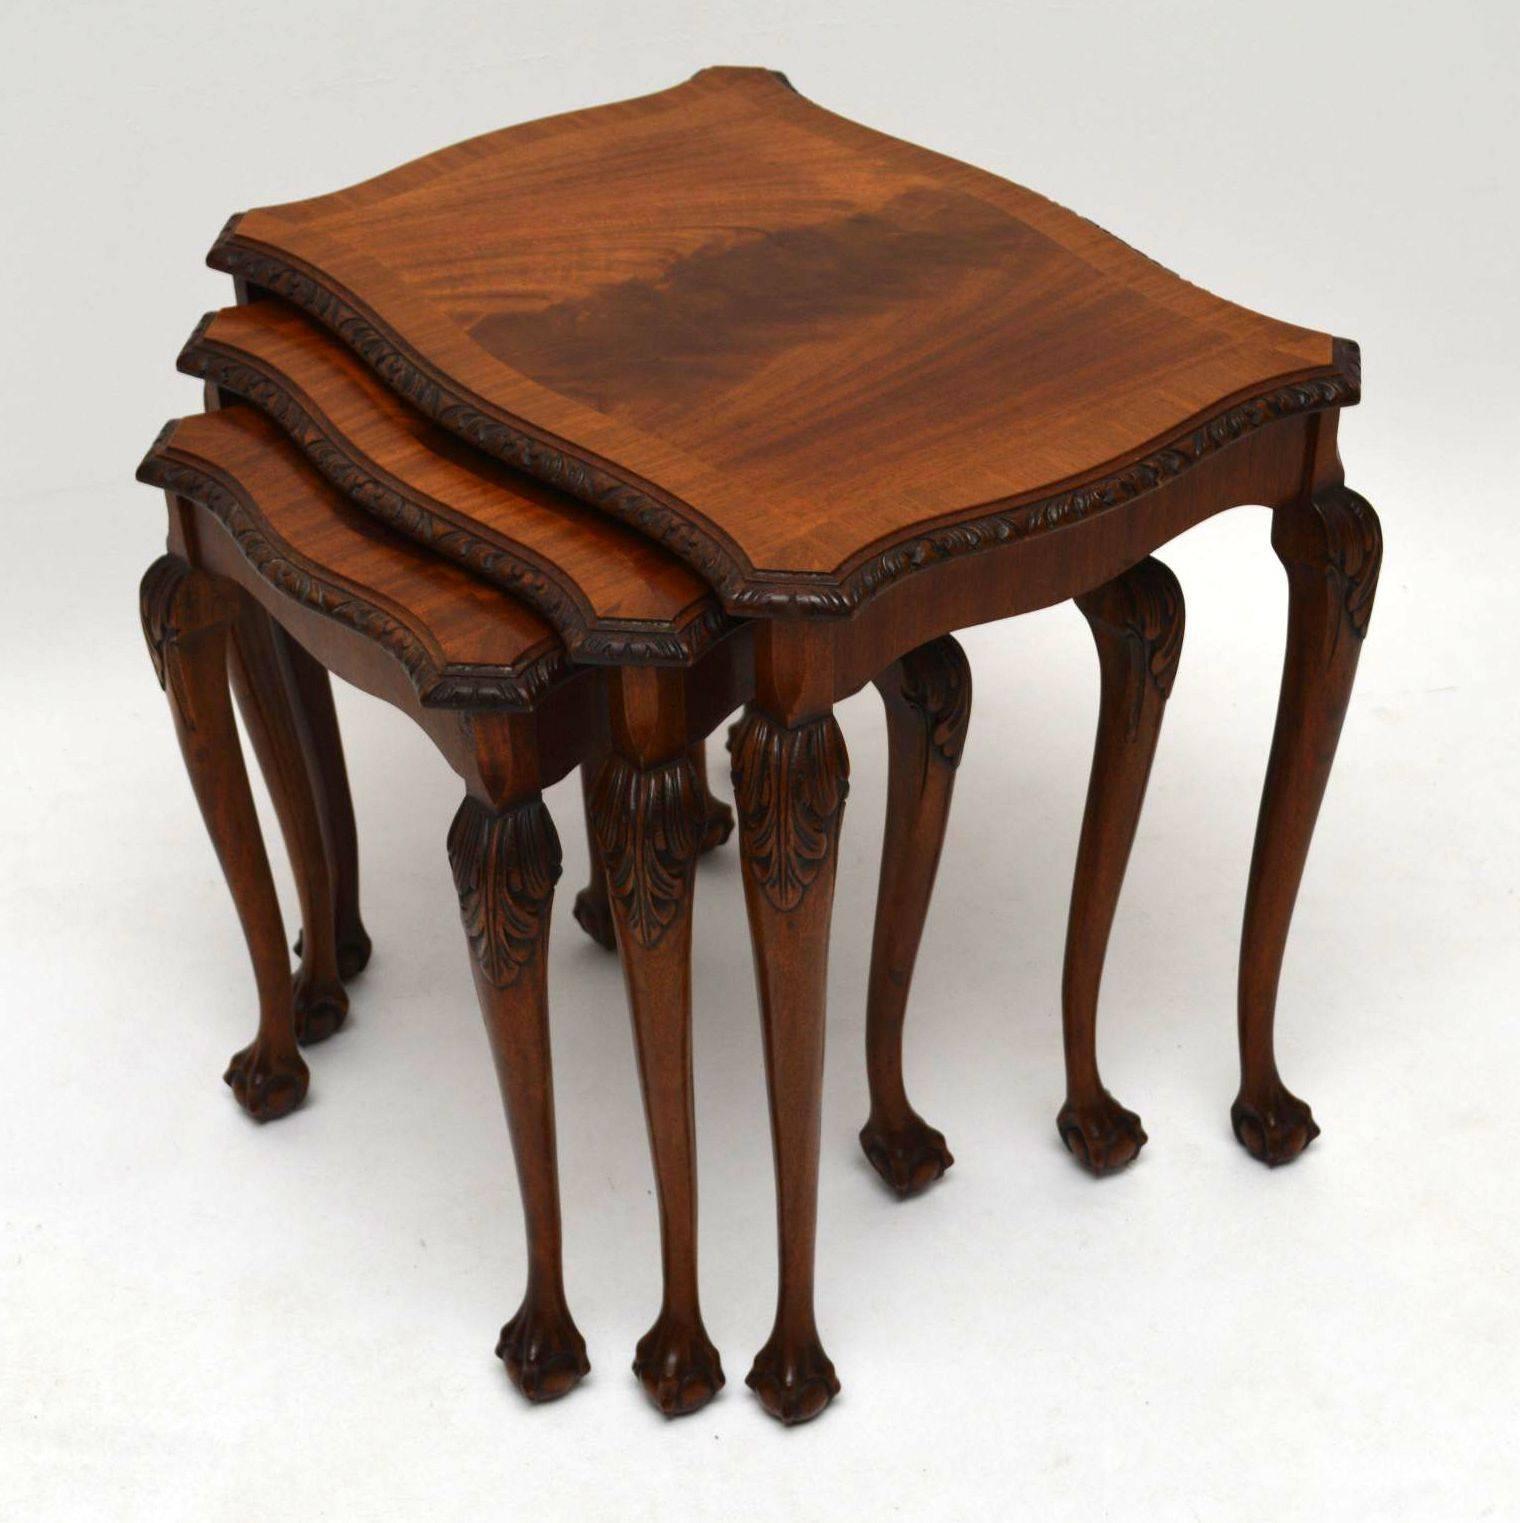 Antique nest of tables in mahogany dating from around the 1920s period and in excellent condition. All the table tops are flame mahogany, with crossbanding and carved edges. There is Fine carving on the legs too which also have detailed ball and